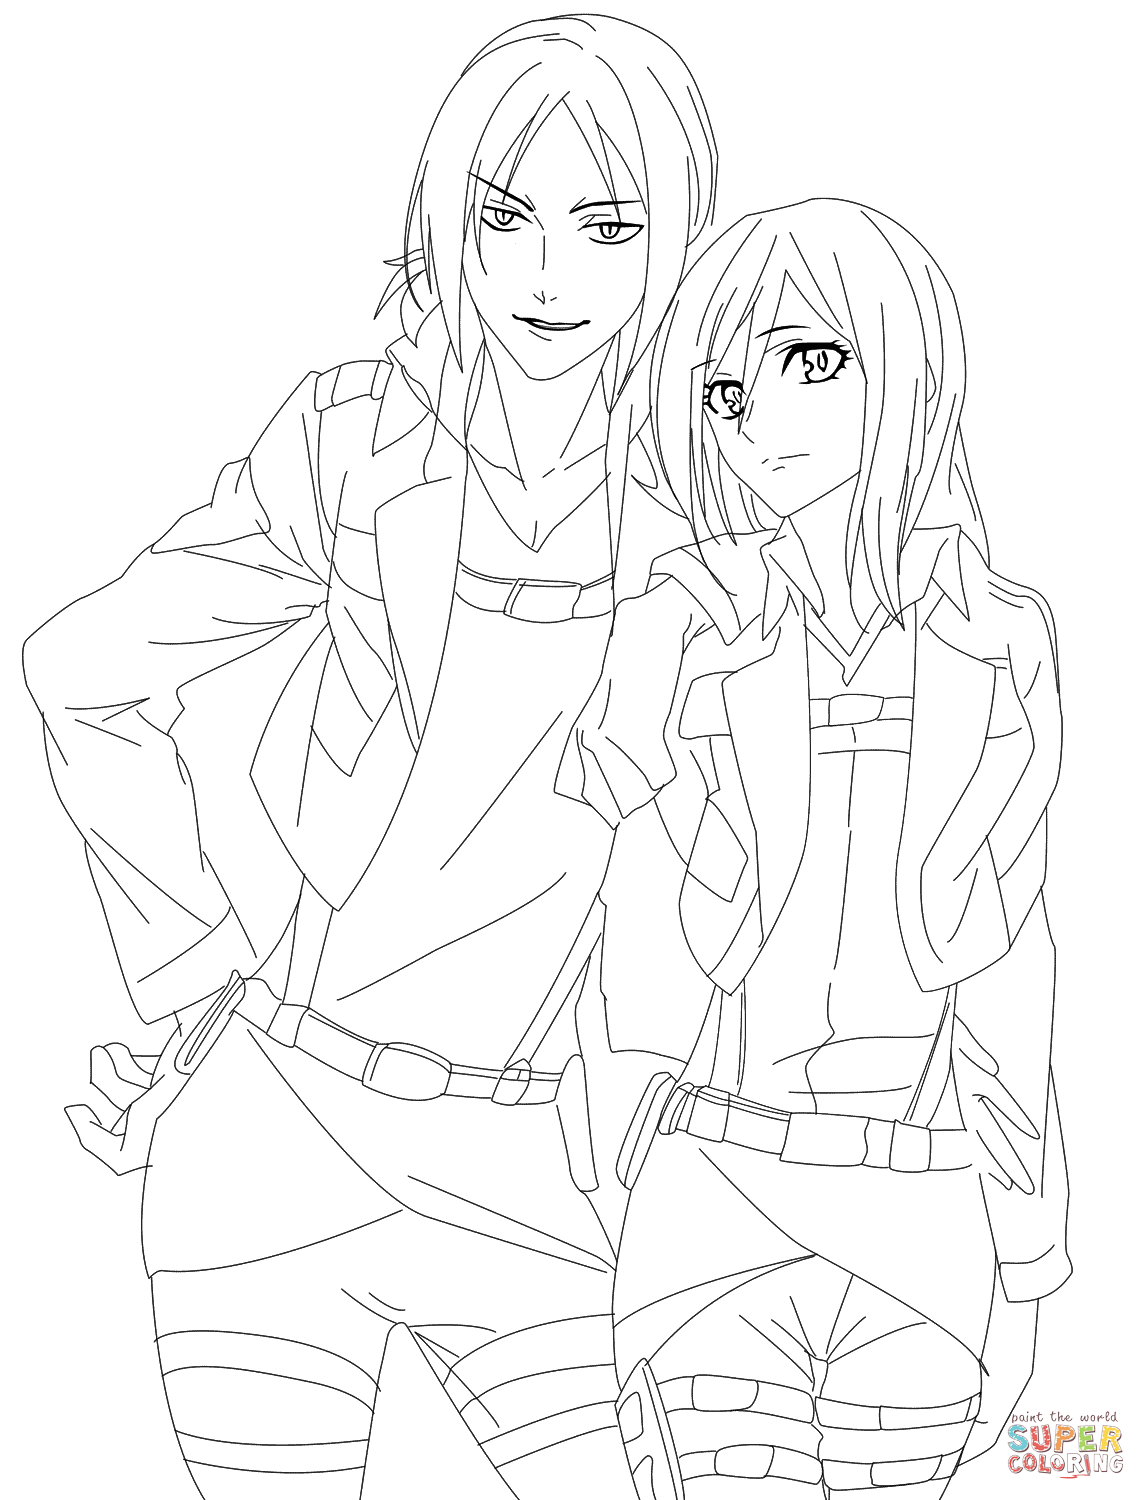 Historia Reiss and Ymir coloring page | Free Printable Coloring Pages